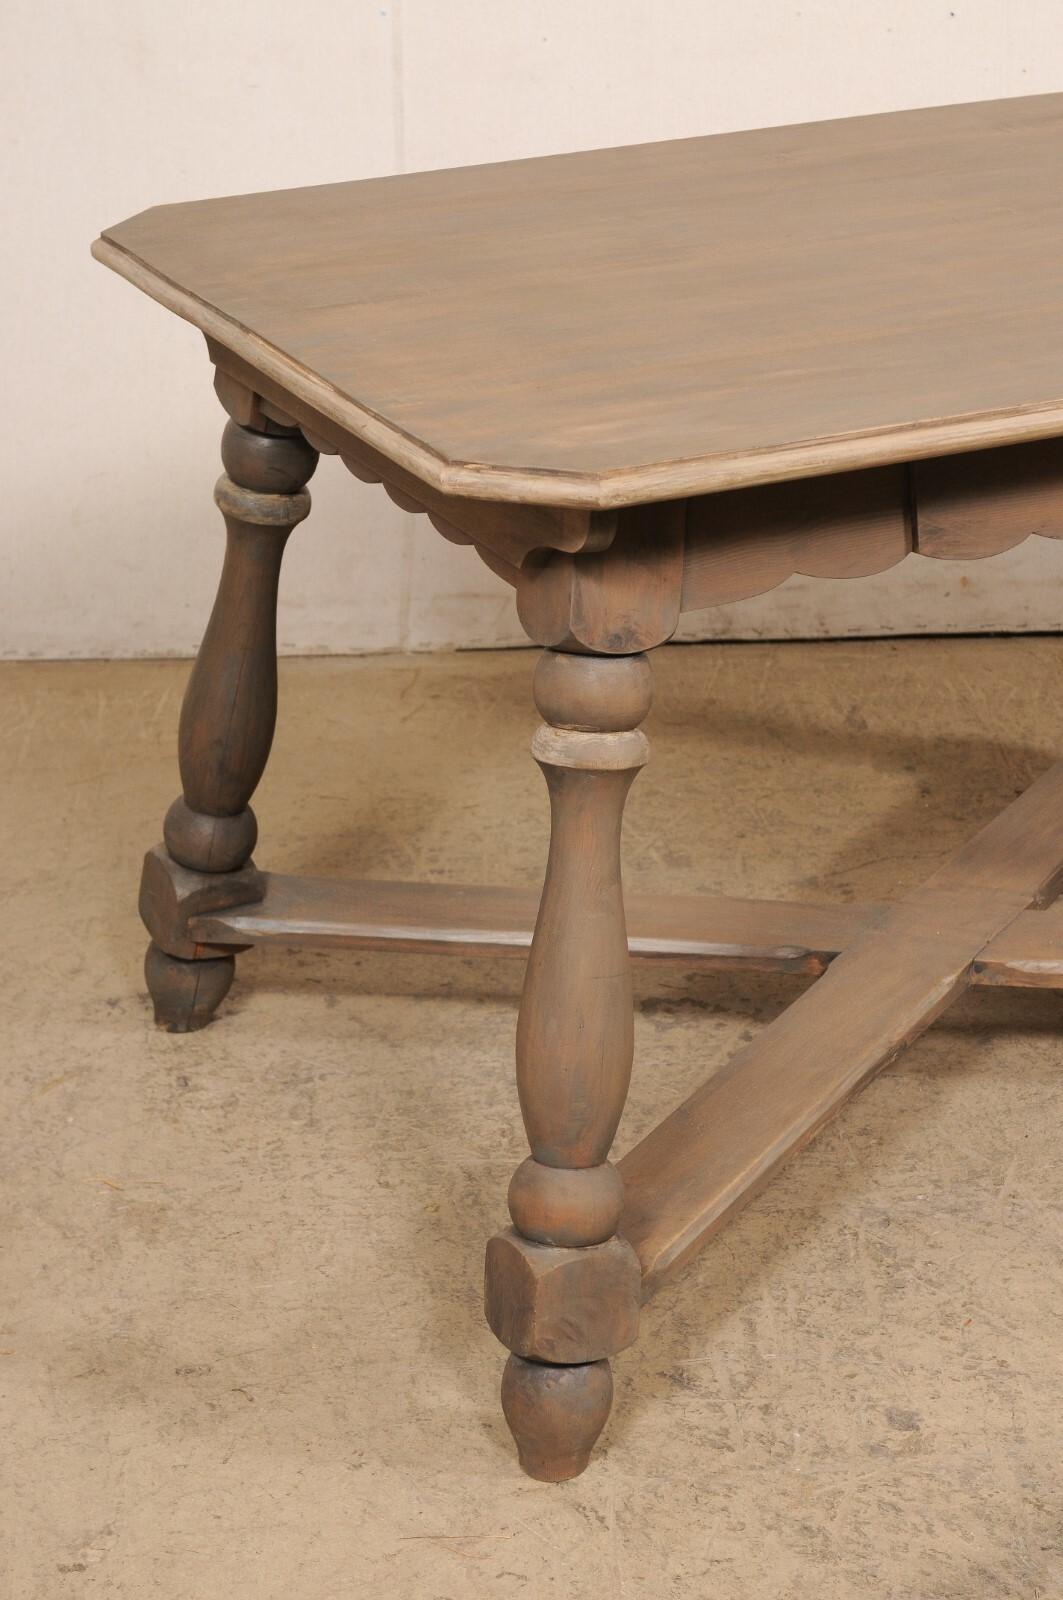 European Wooden Table w/Scalloped Apron, Nicely Turned Legs & X-Stretcher For Sale 2